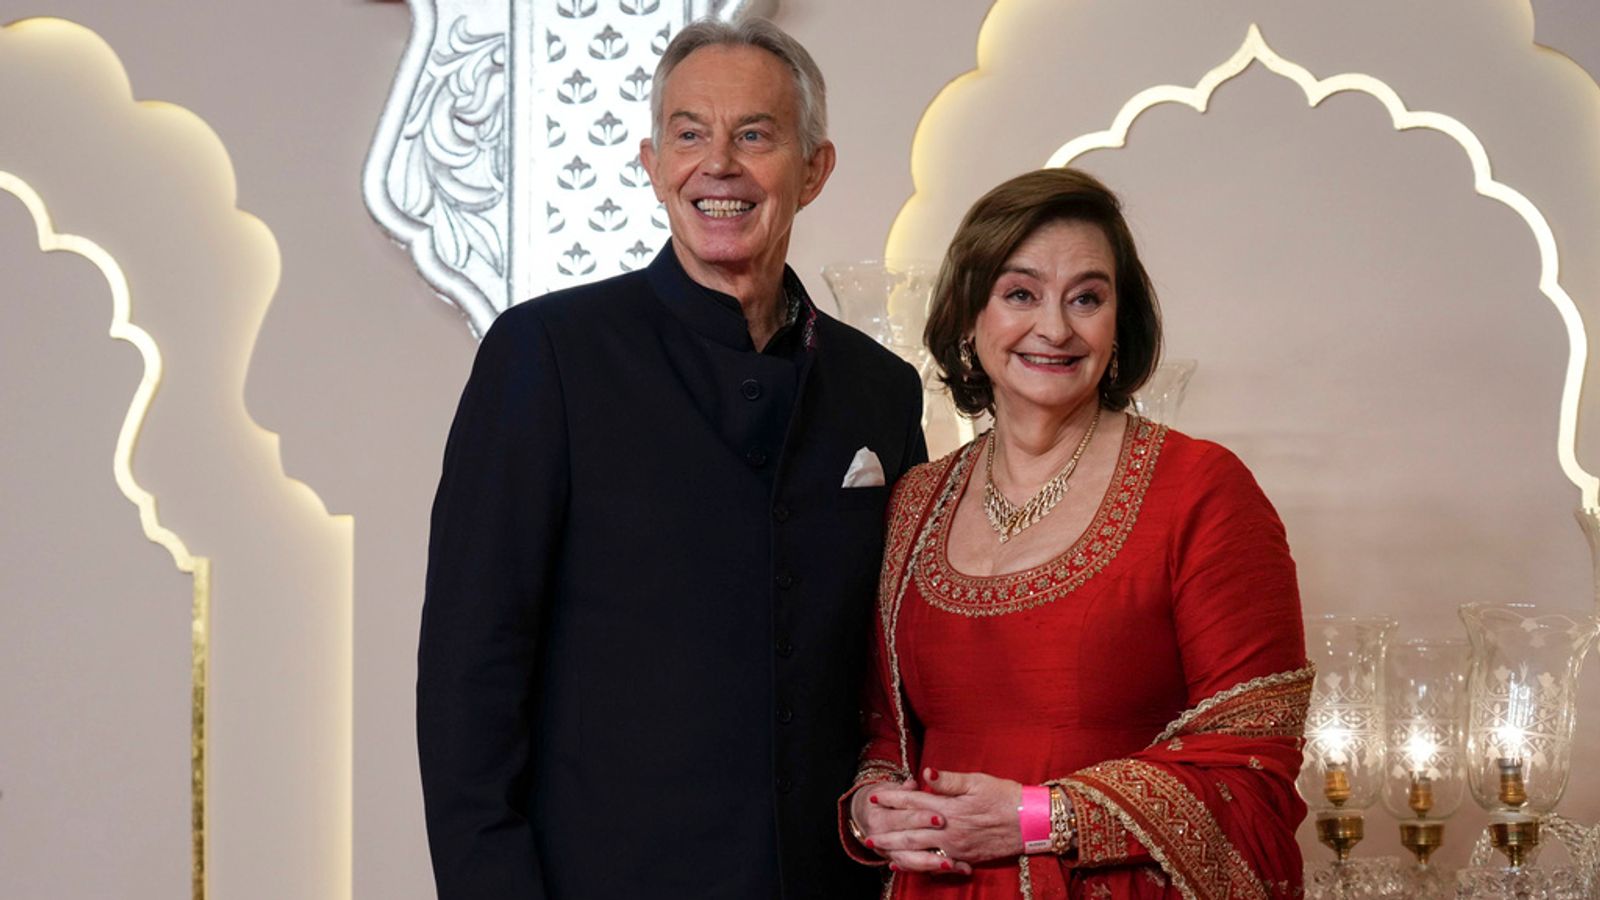 Ambani’s wedding in pictures: Sir Tony Blair, John Cena and Bollywood royalty at the wedding of the son of Asia’s richest man | Ents & Arts News